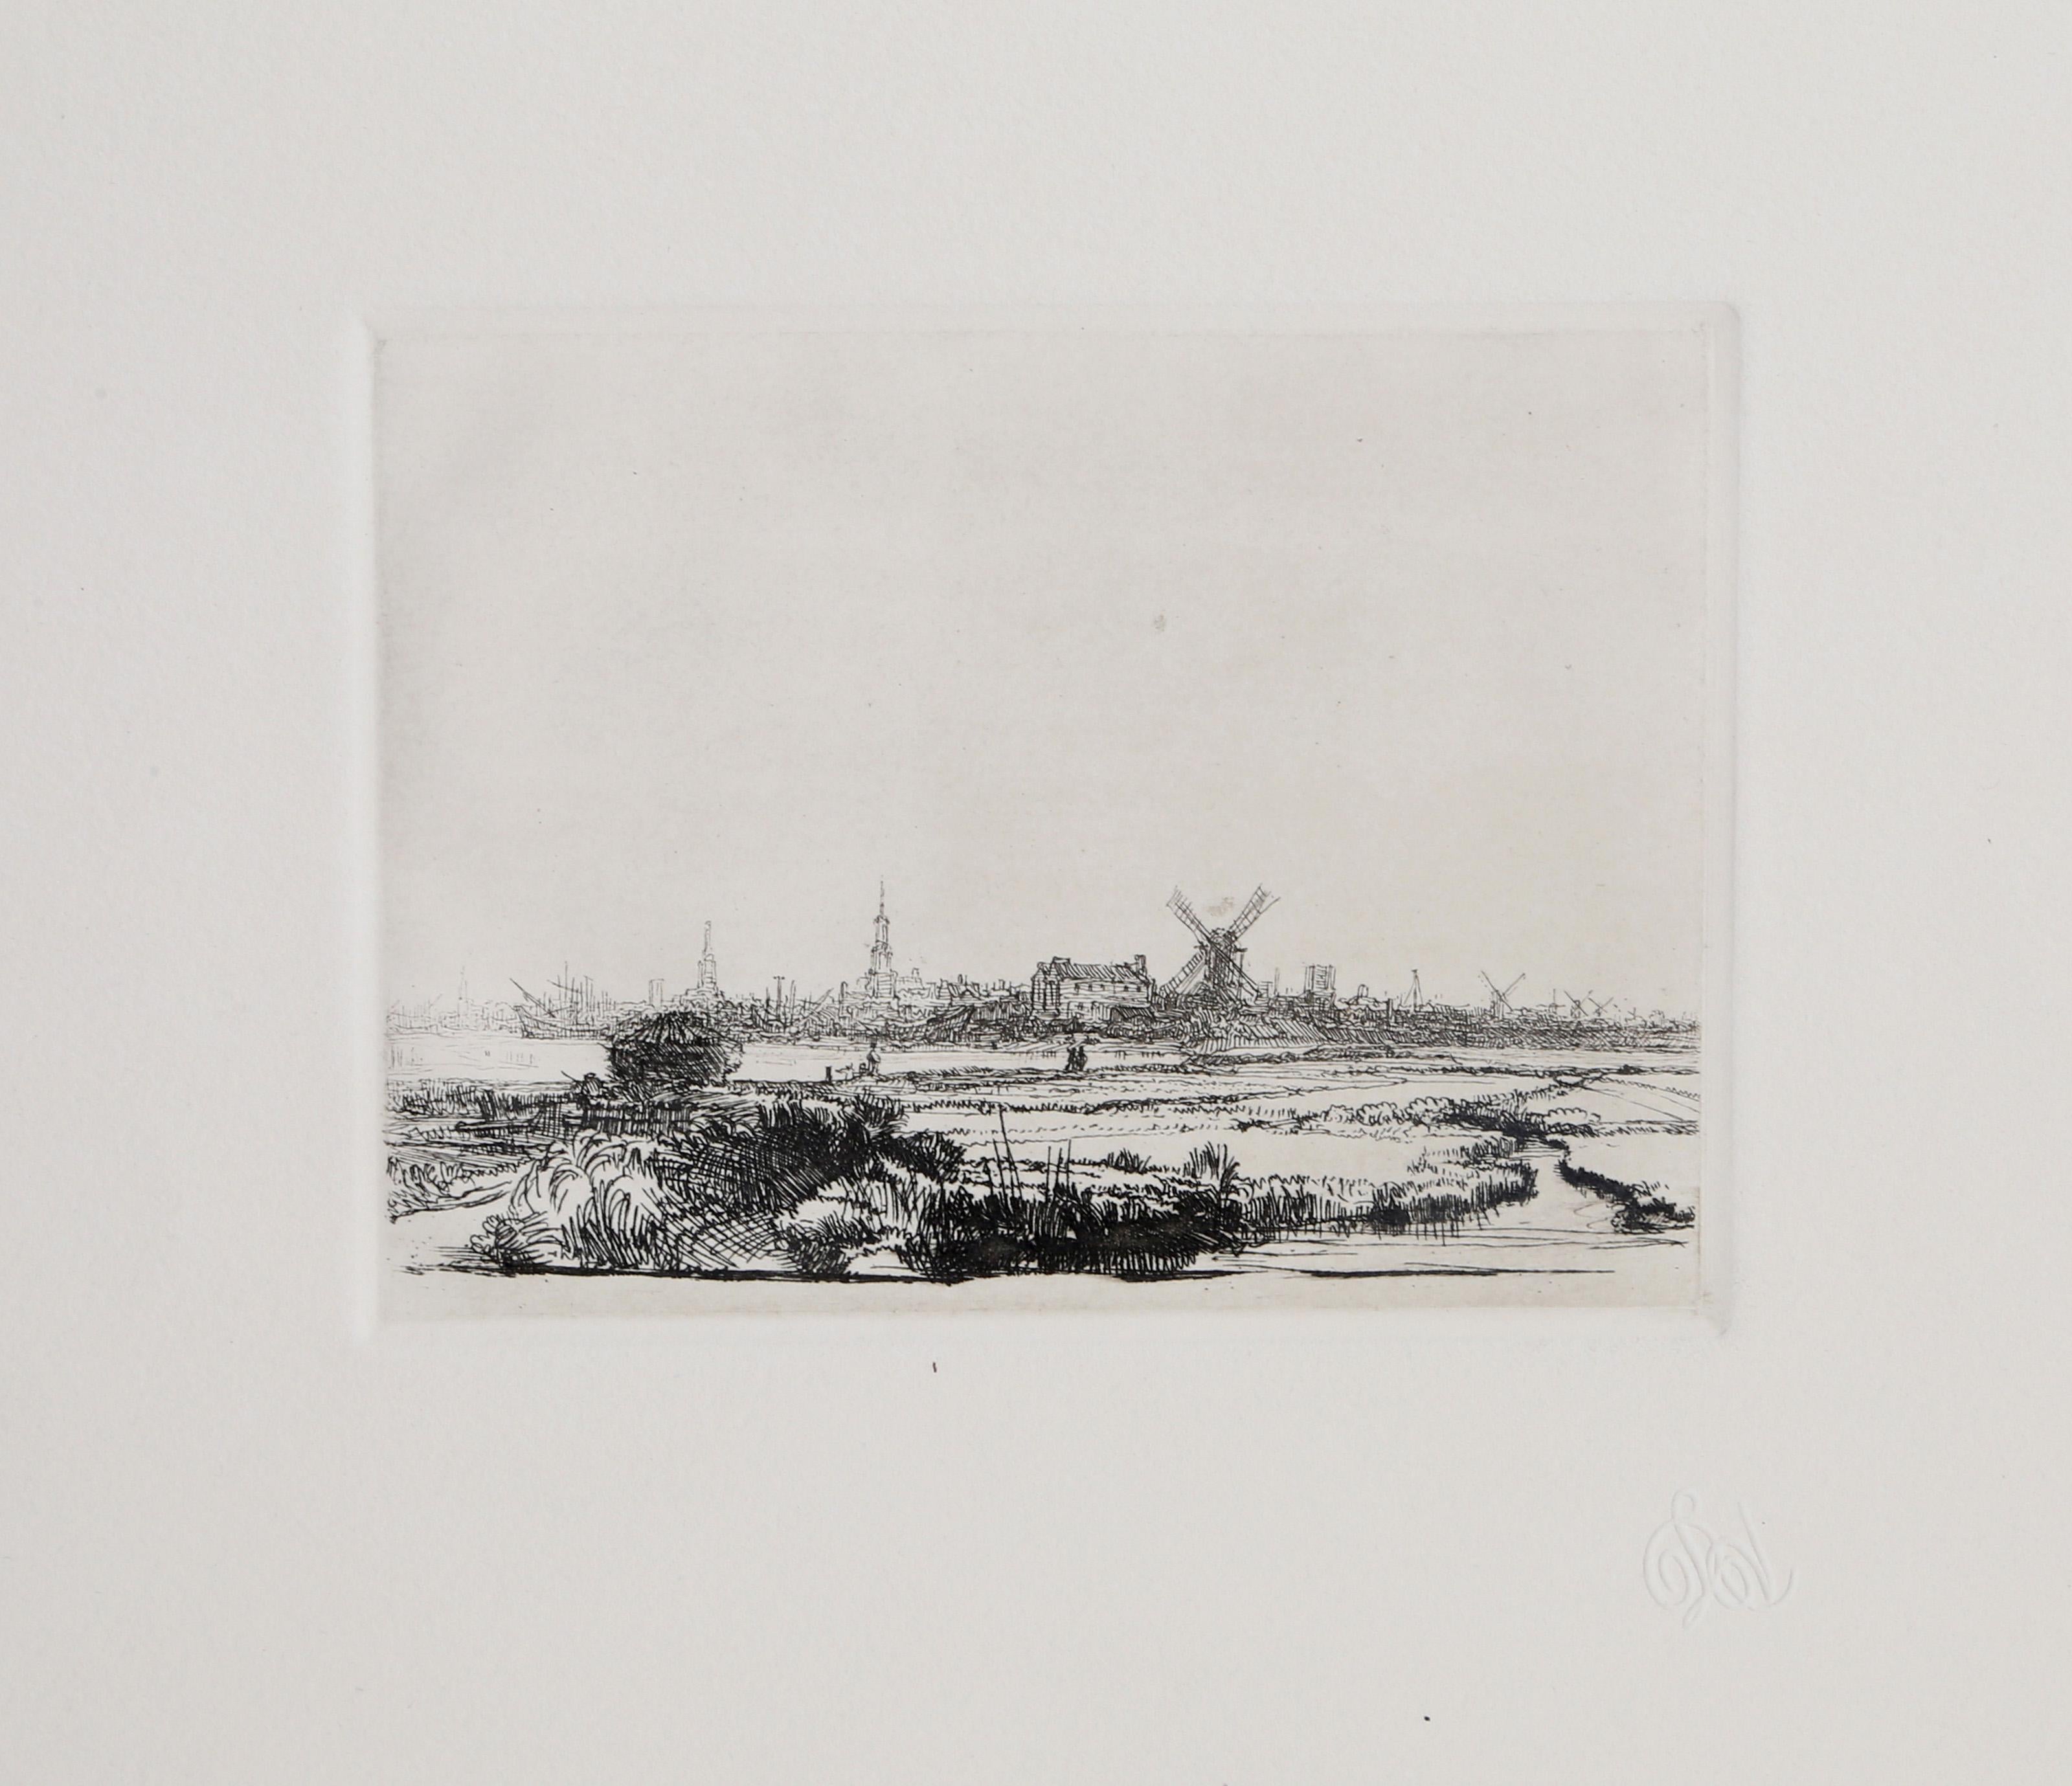 Rembrandt van Rijn Print - View of Amsterdam from the Northwest (B212), Etching, labeled verso by Rembrandt